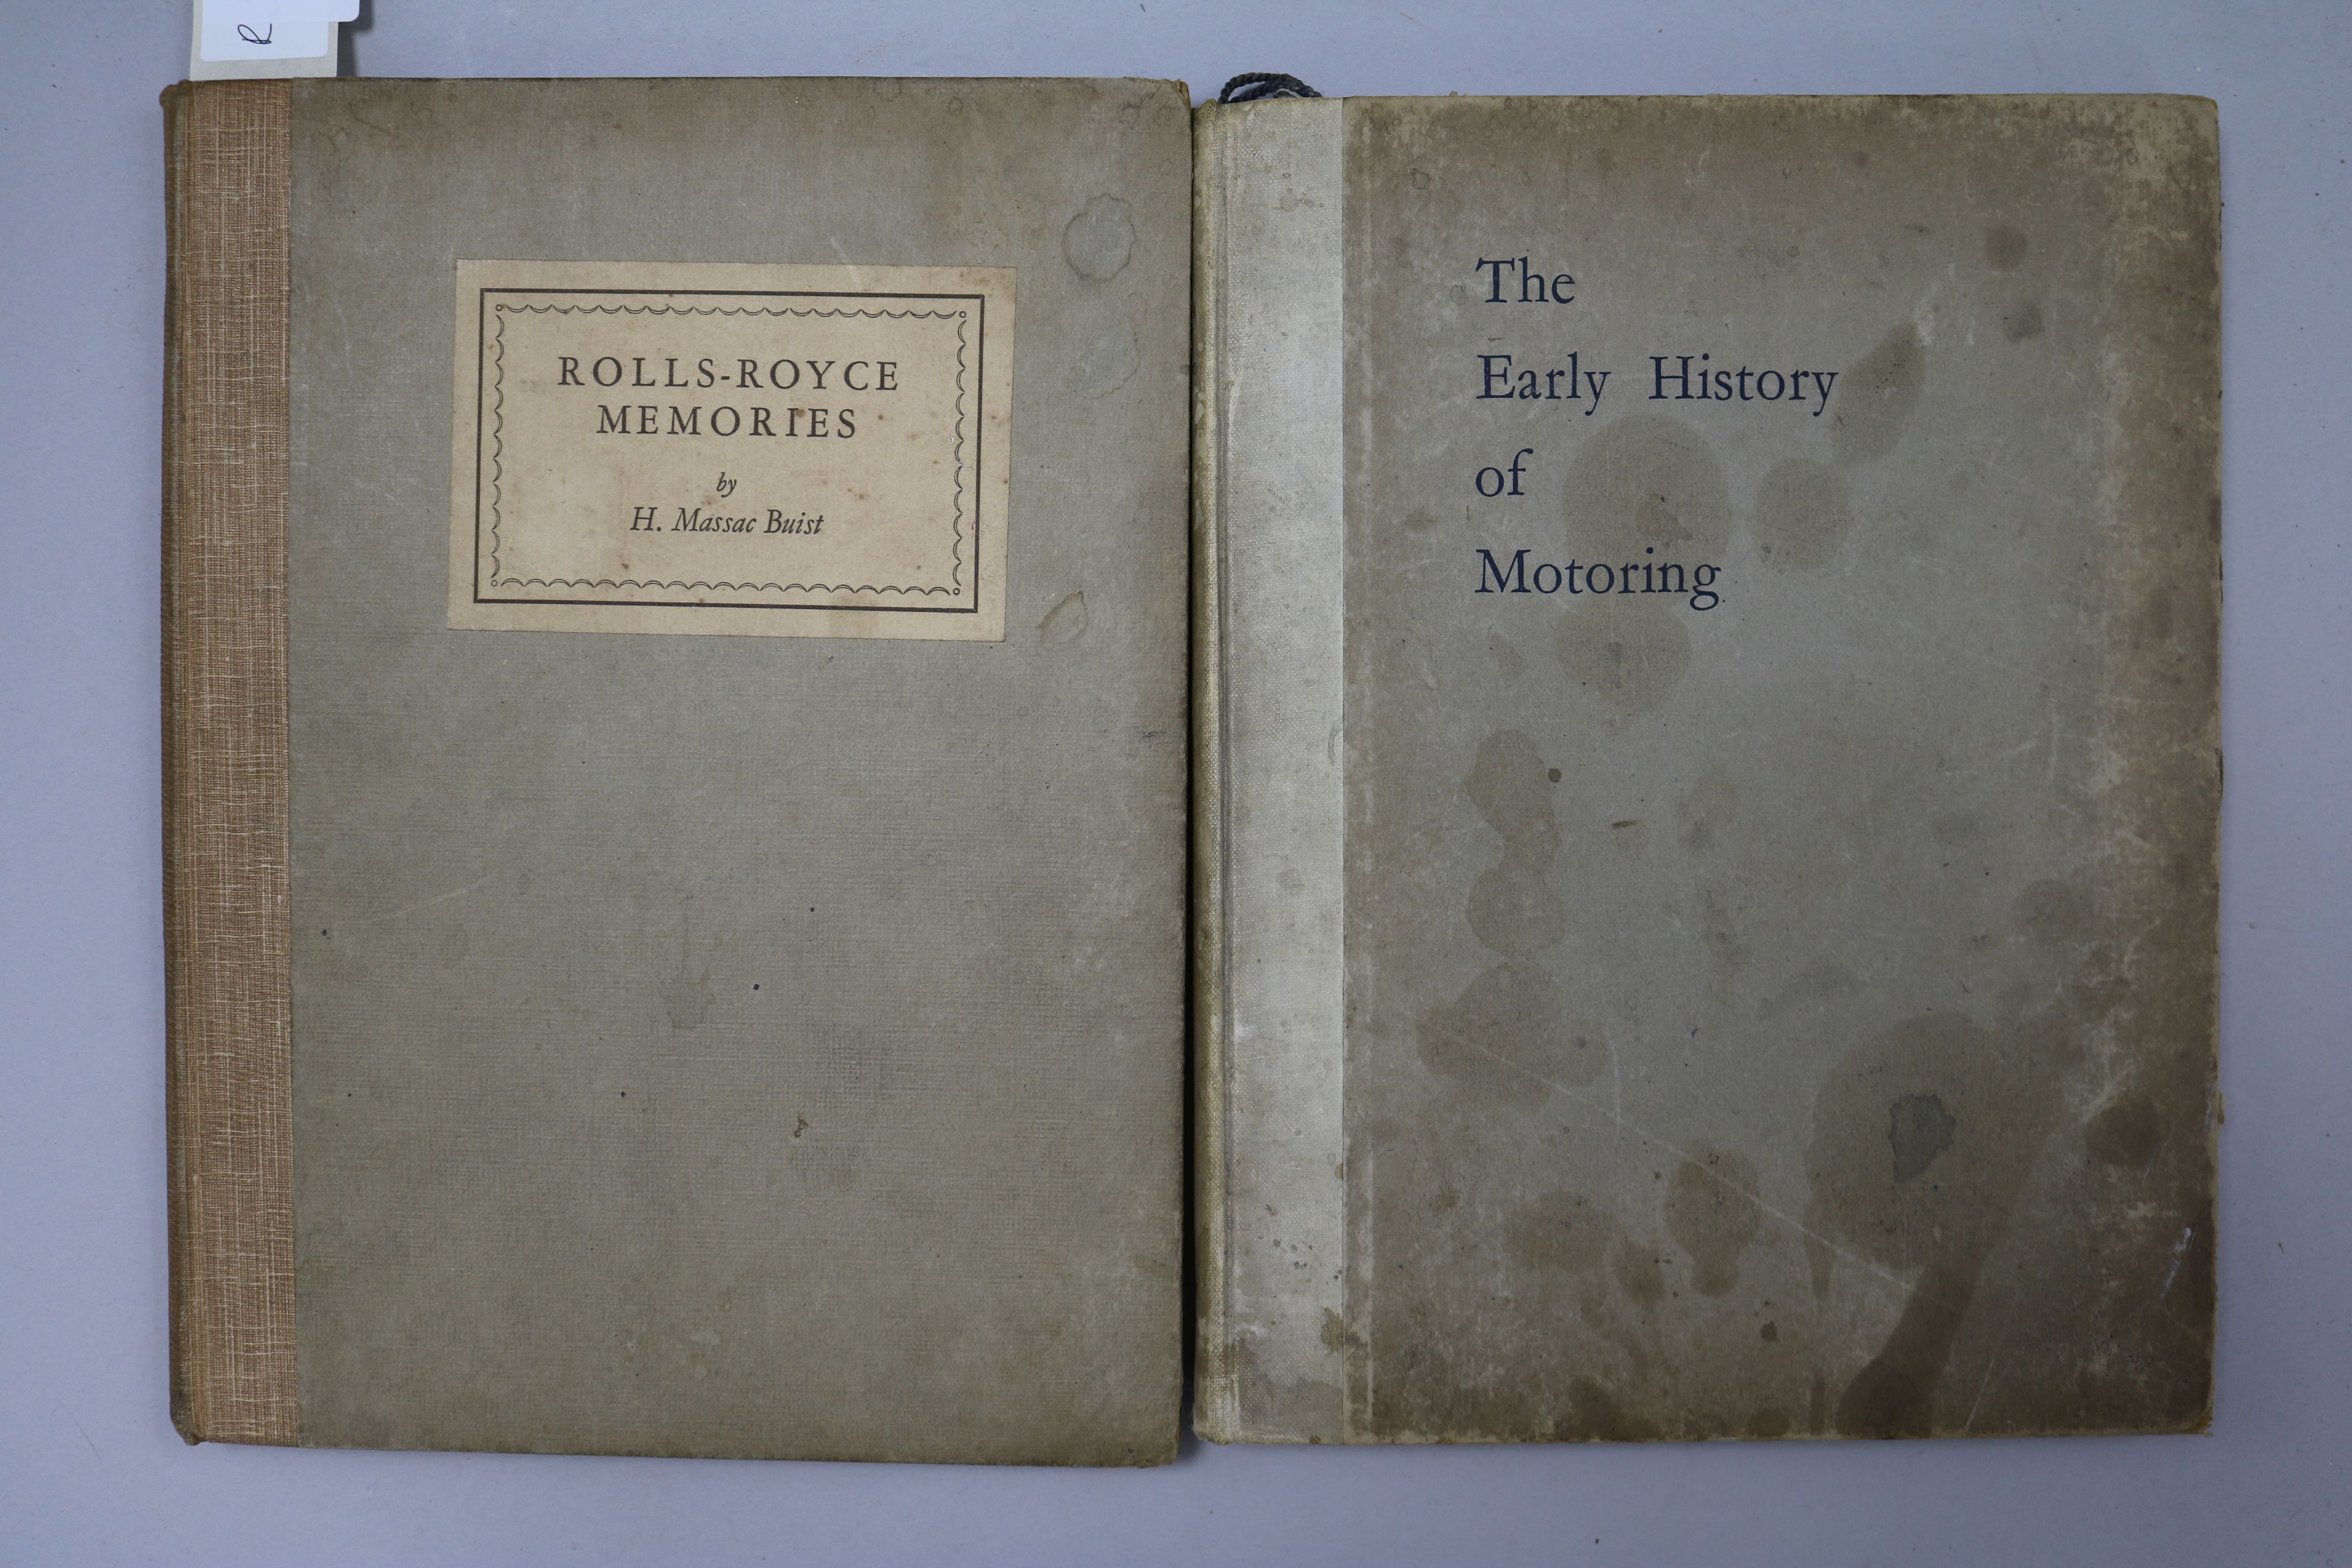 Claude Johnson, 'The Early History of Motoring', published by Ed. J. Burrow & Co. Ltd., c.1925, H.